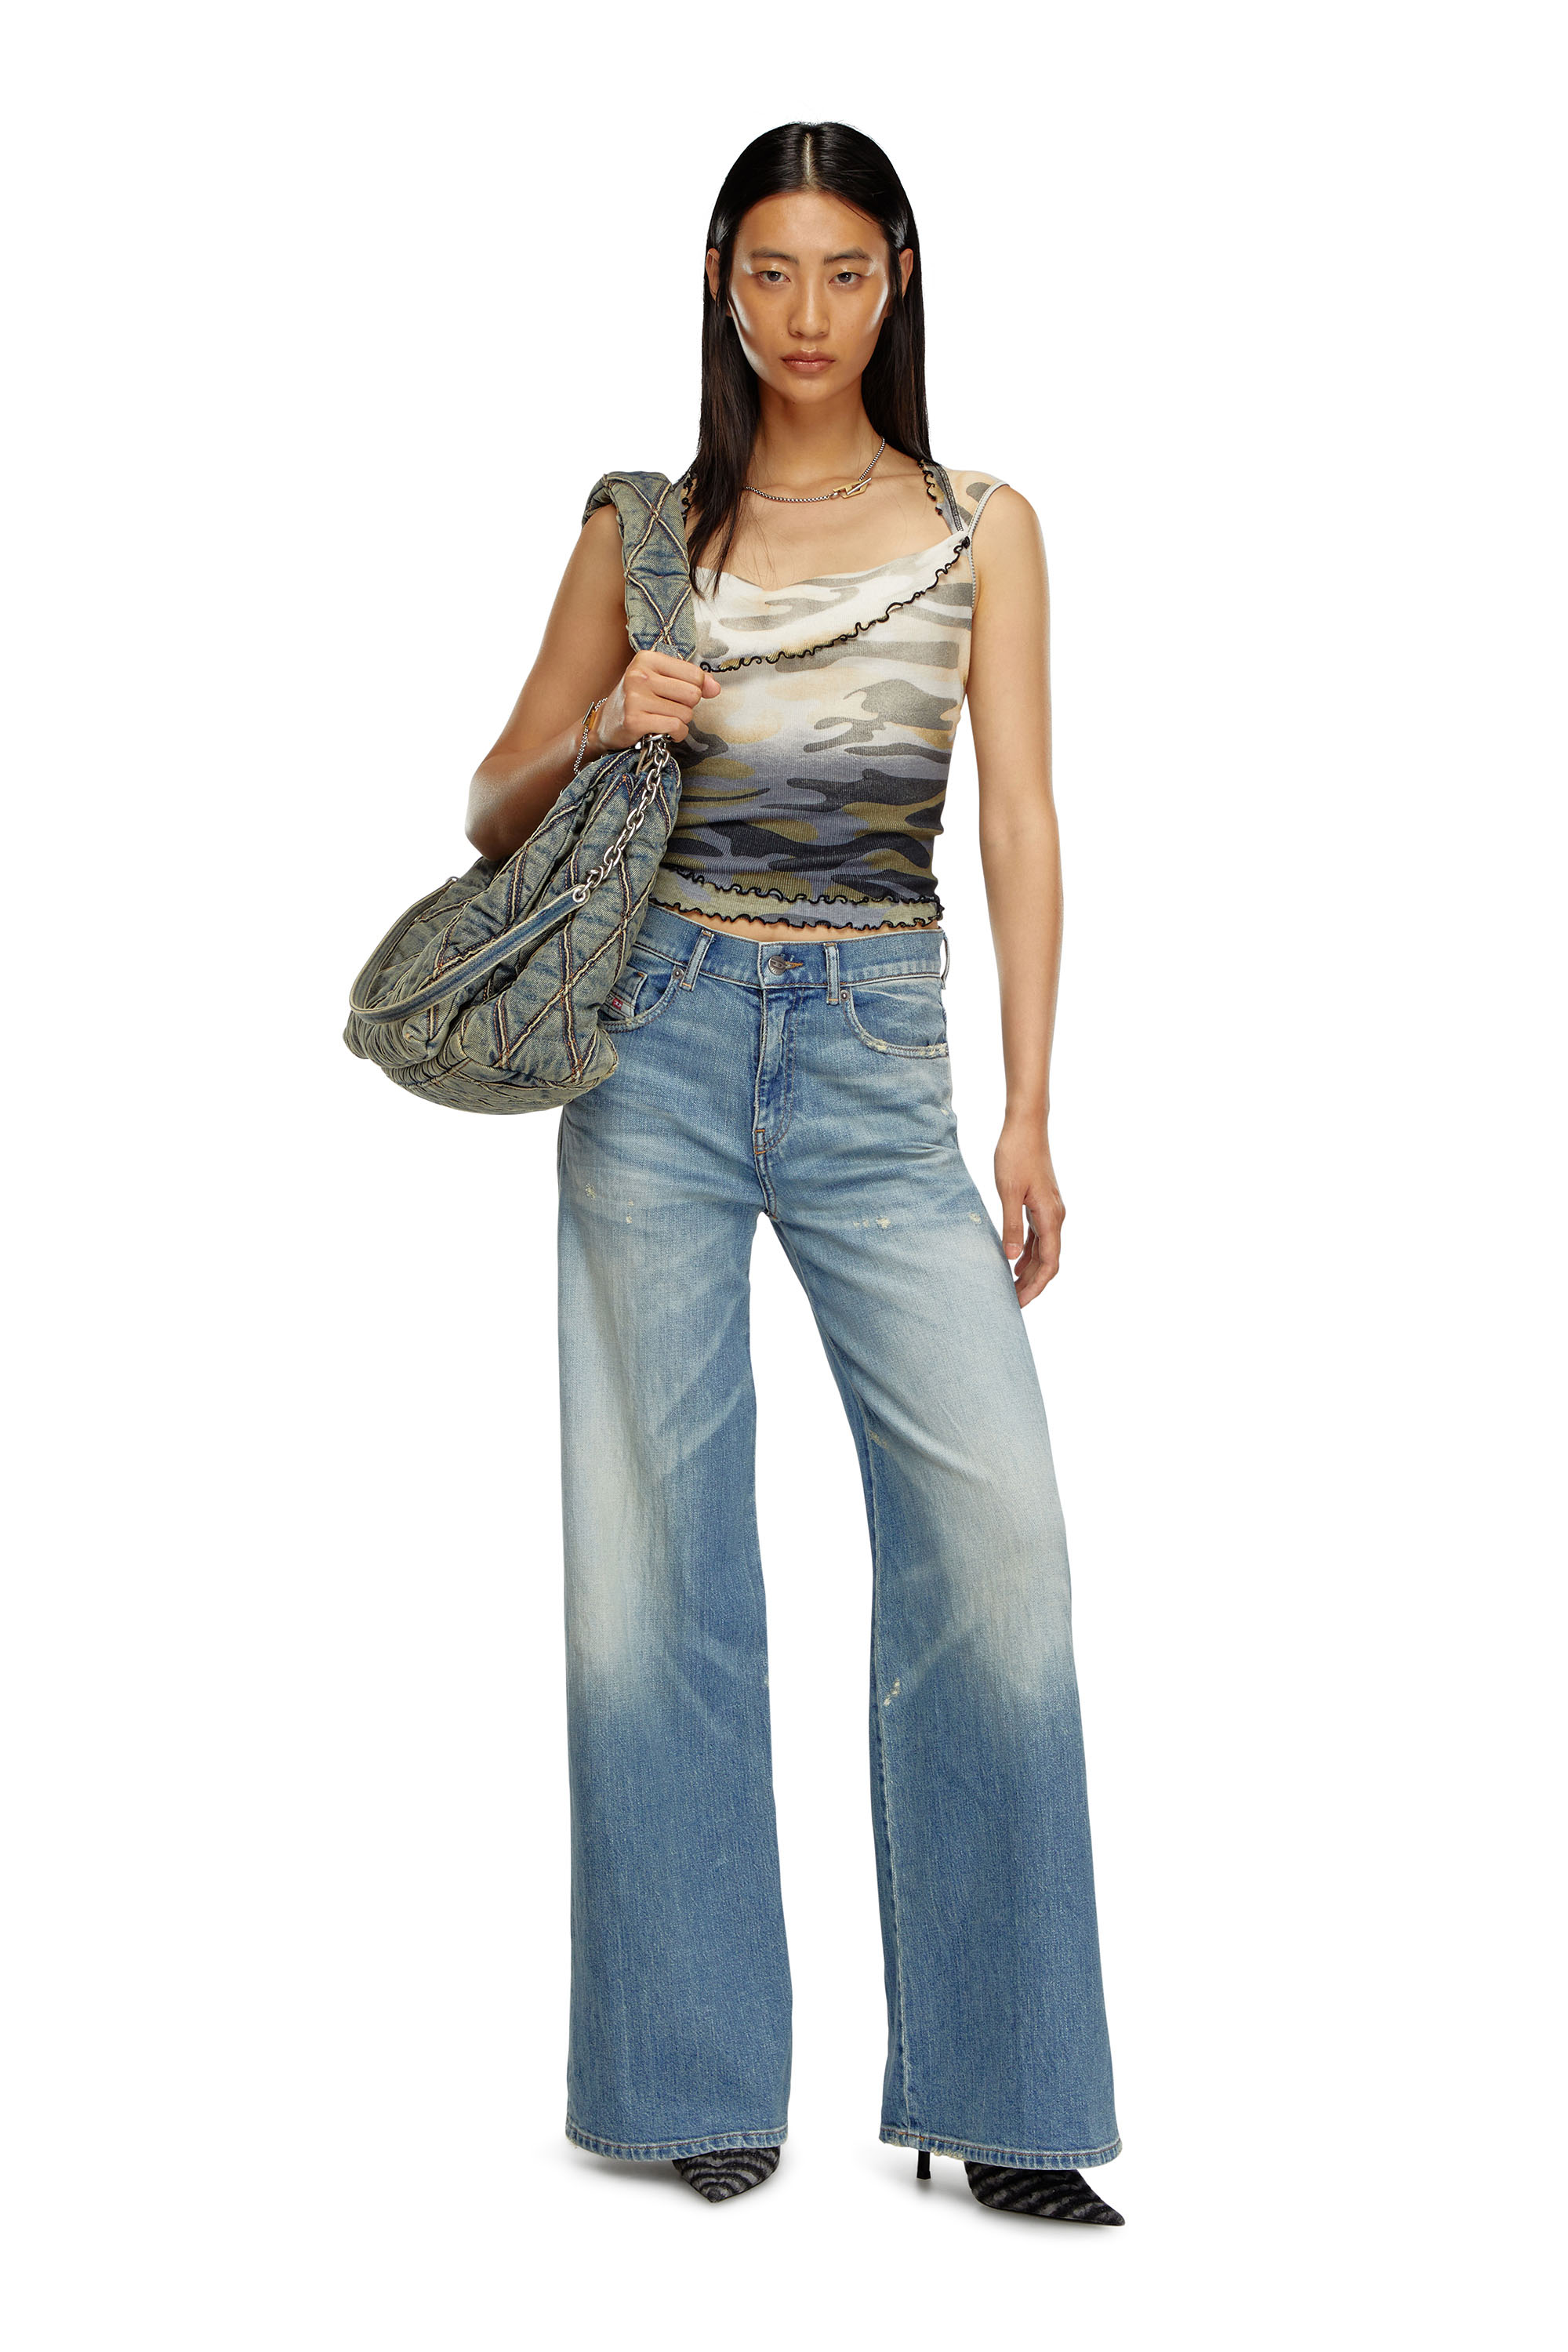 Diesel - Bootcut and Flare Jeans 1978 D-Akemi 09J44, Mujer Bootcut y Flare Jeans - 1978 D-Akemi in Azul marino - Image 2